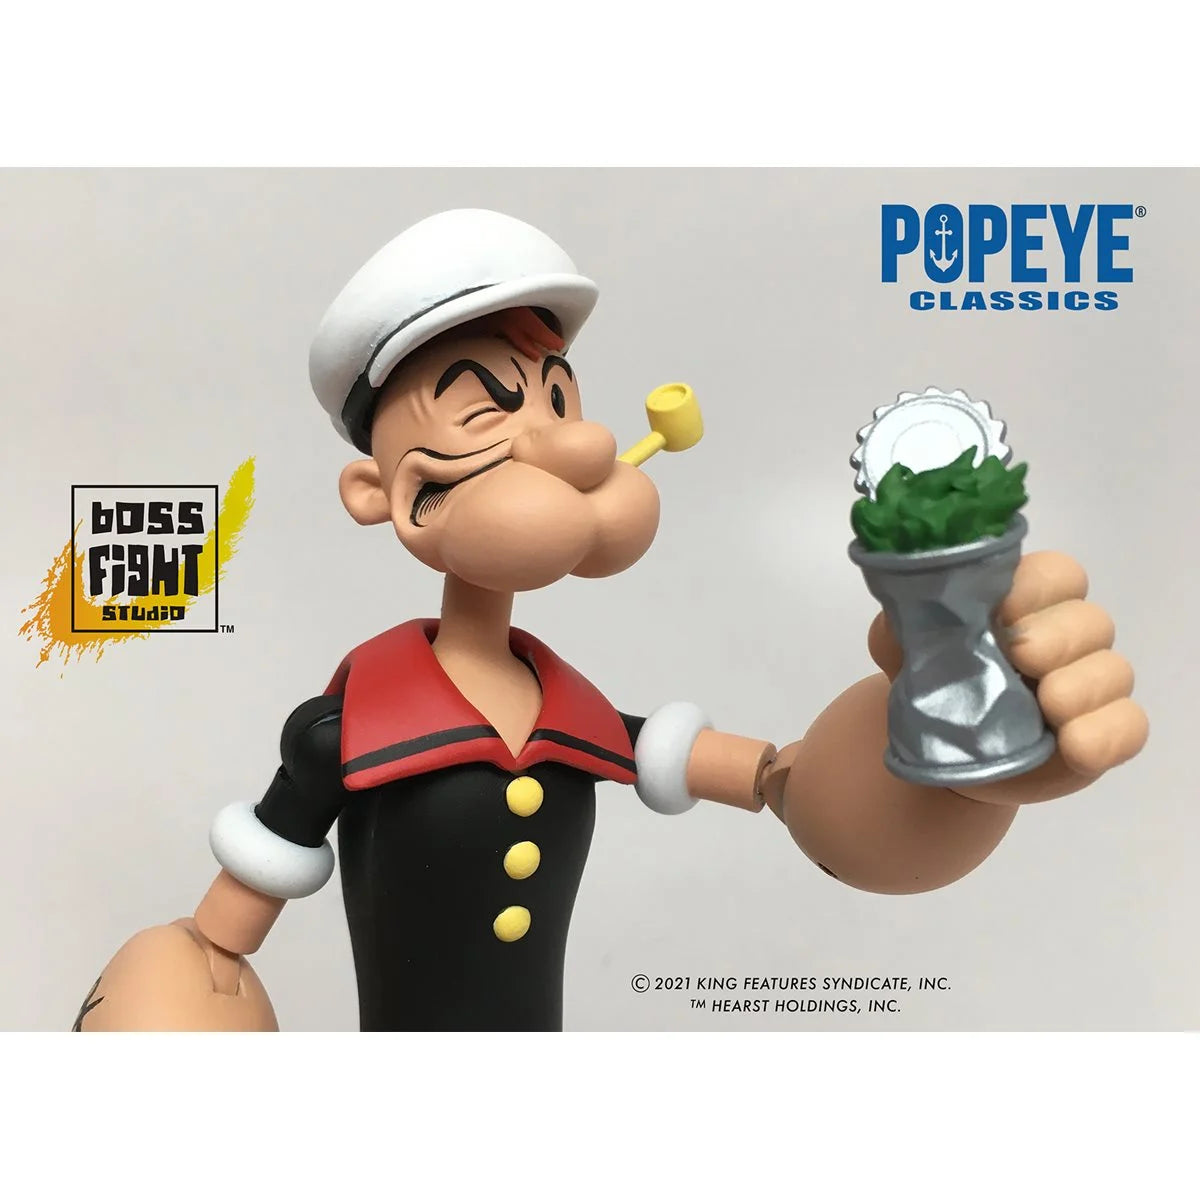 Popeye Classics Popeye the Sailor Man 1:12 Scale Wave 1 Action Figure